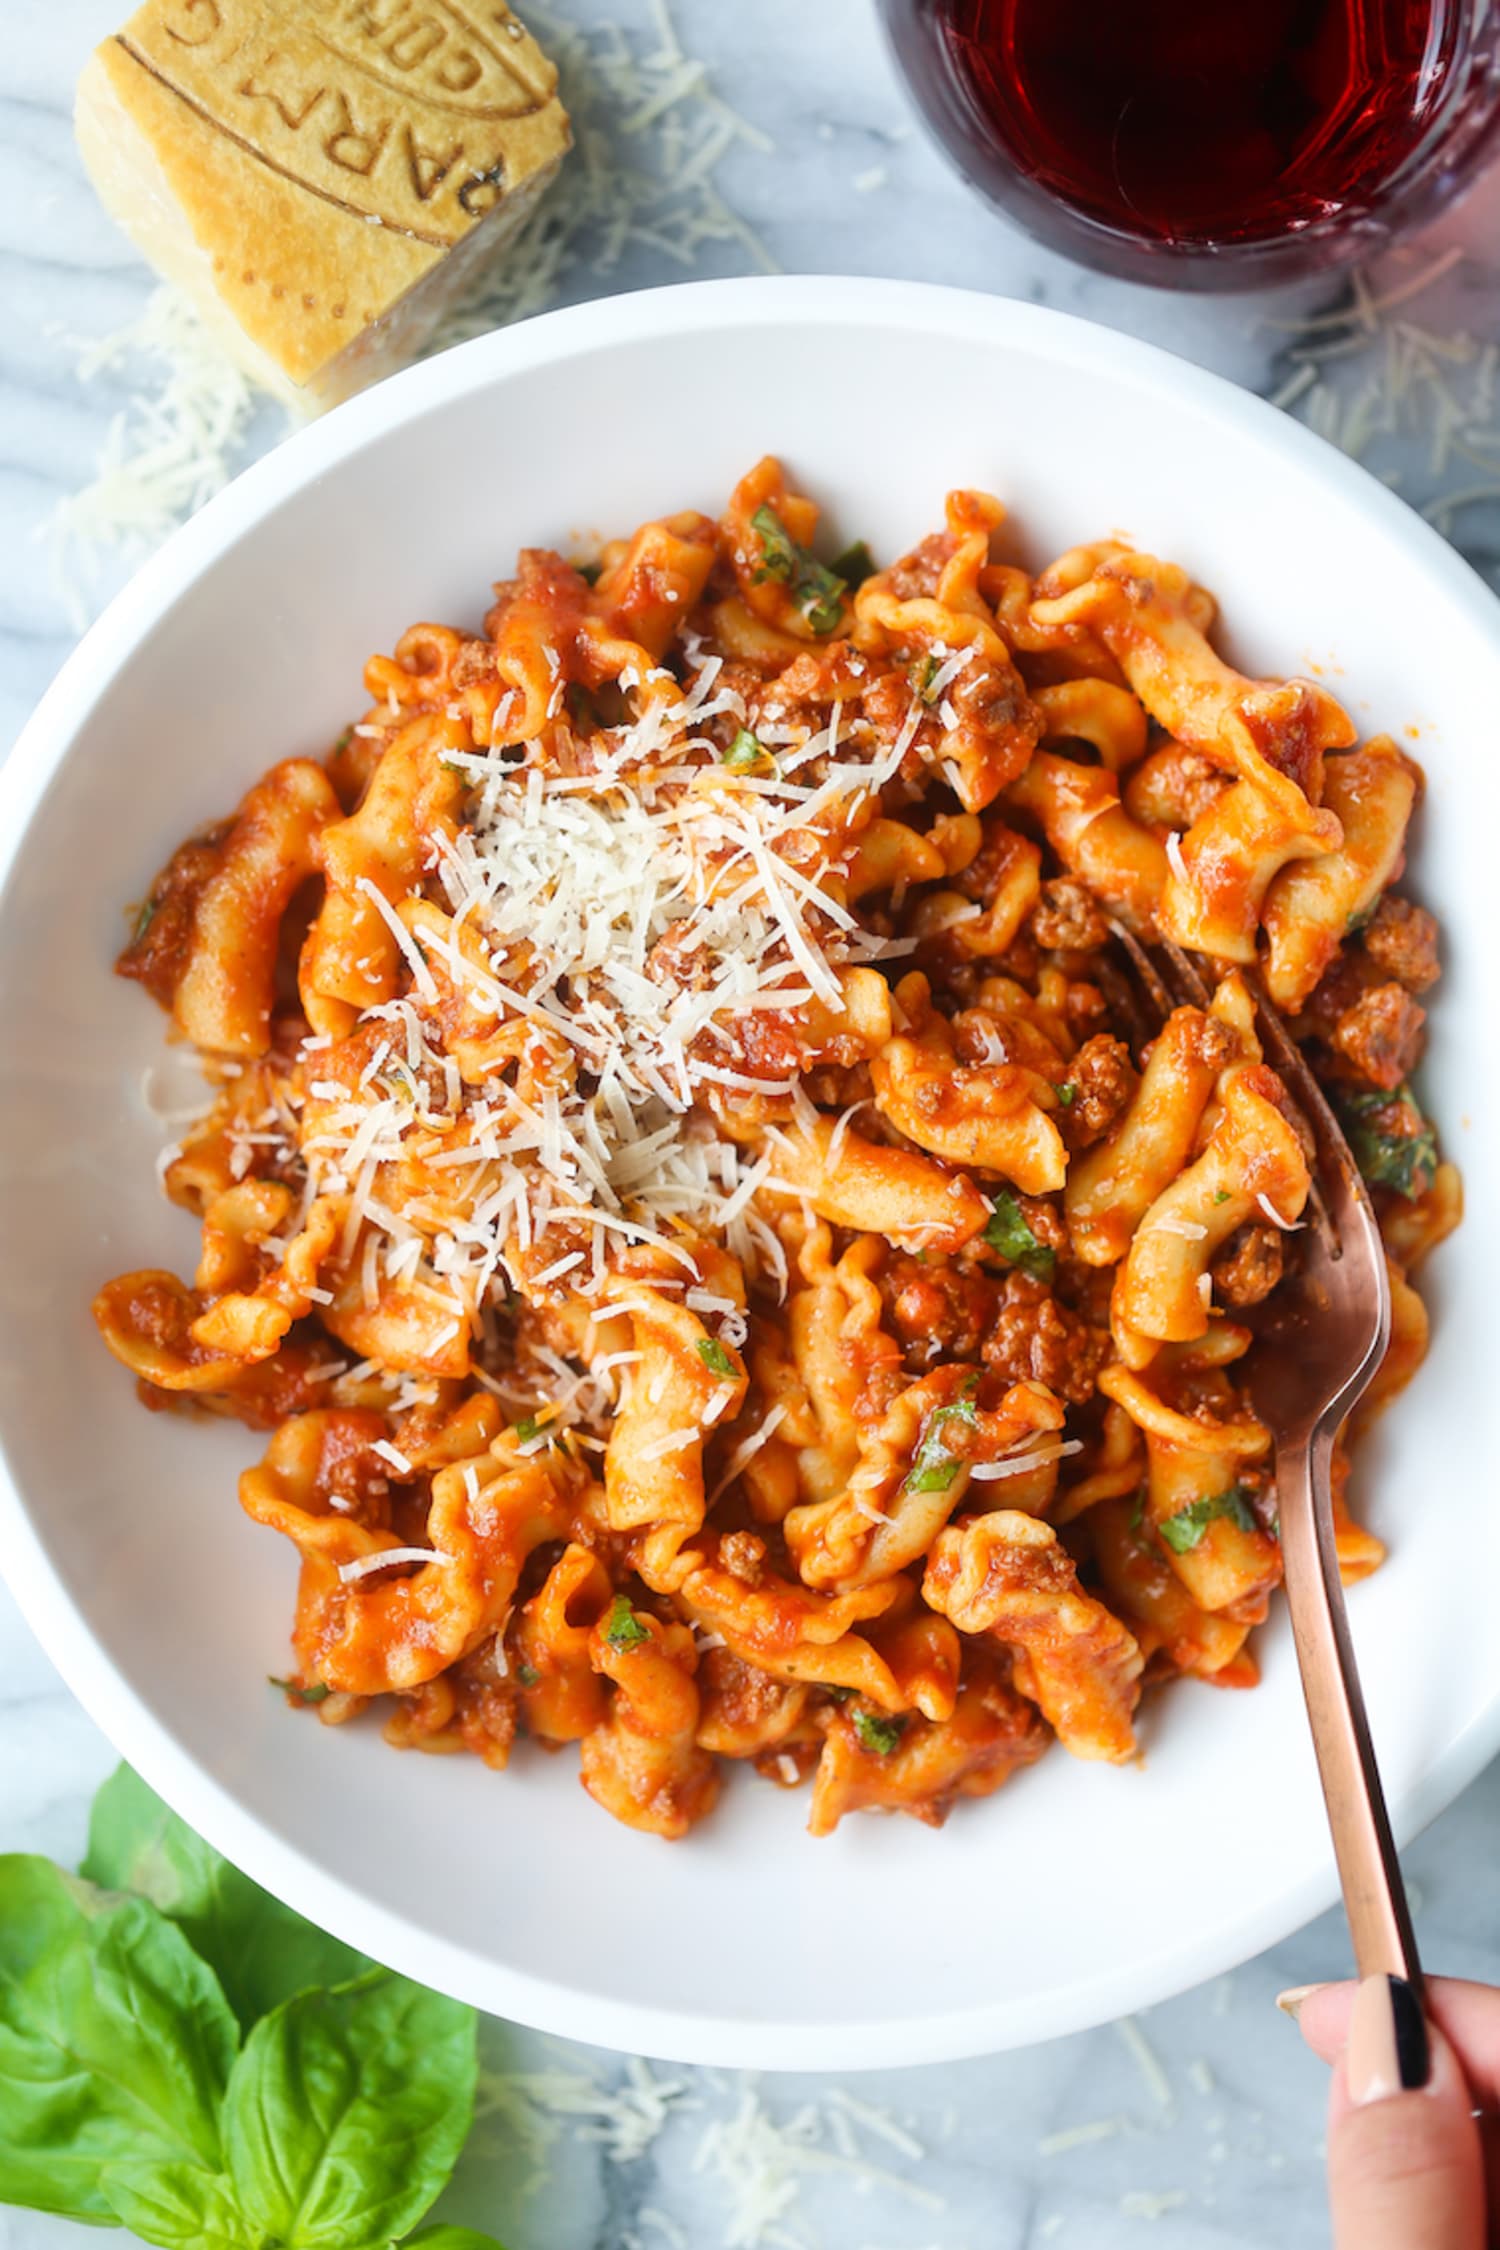 Recipes With Ground Beef And Pasta | Easy Recipes Online